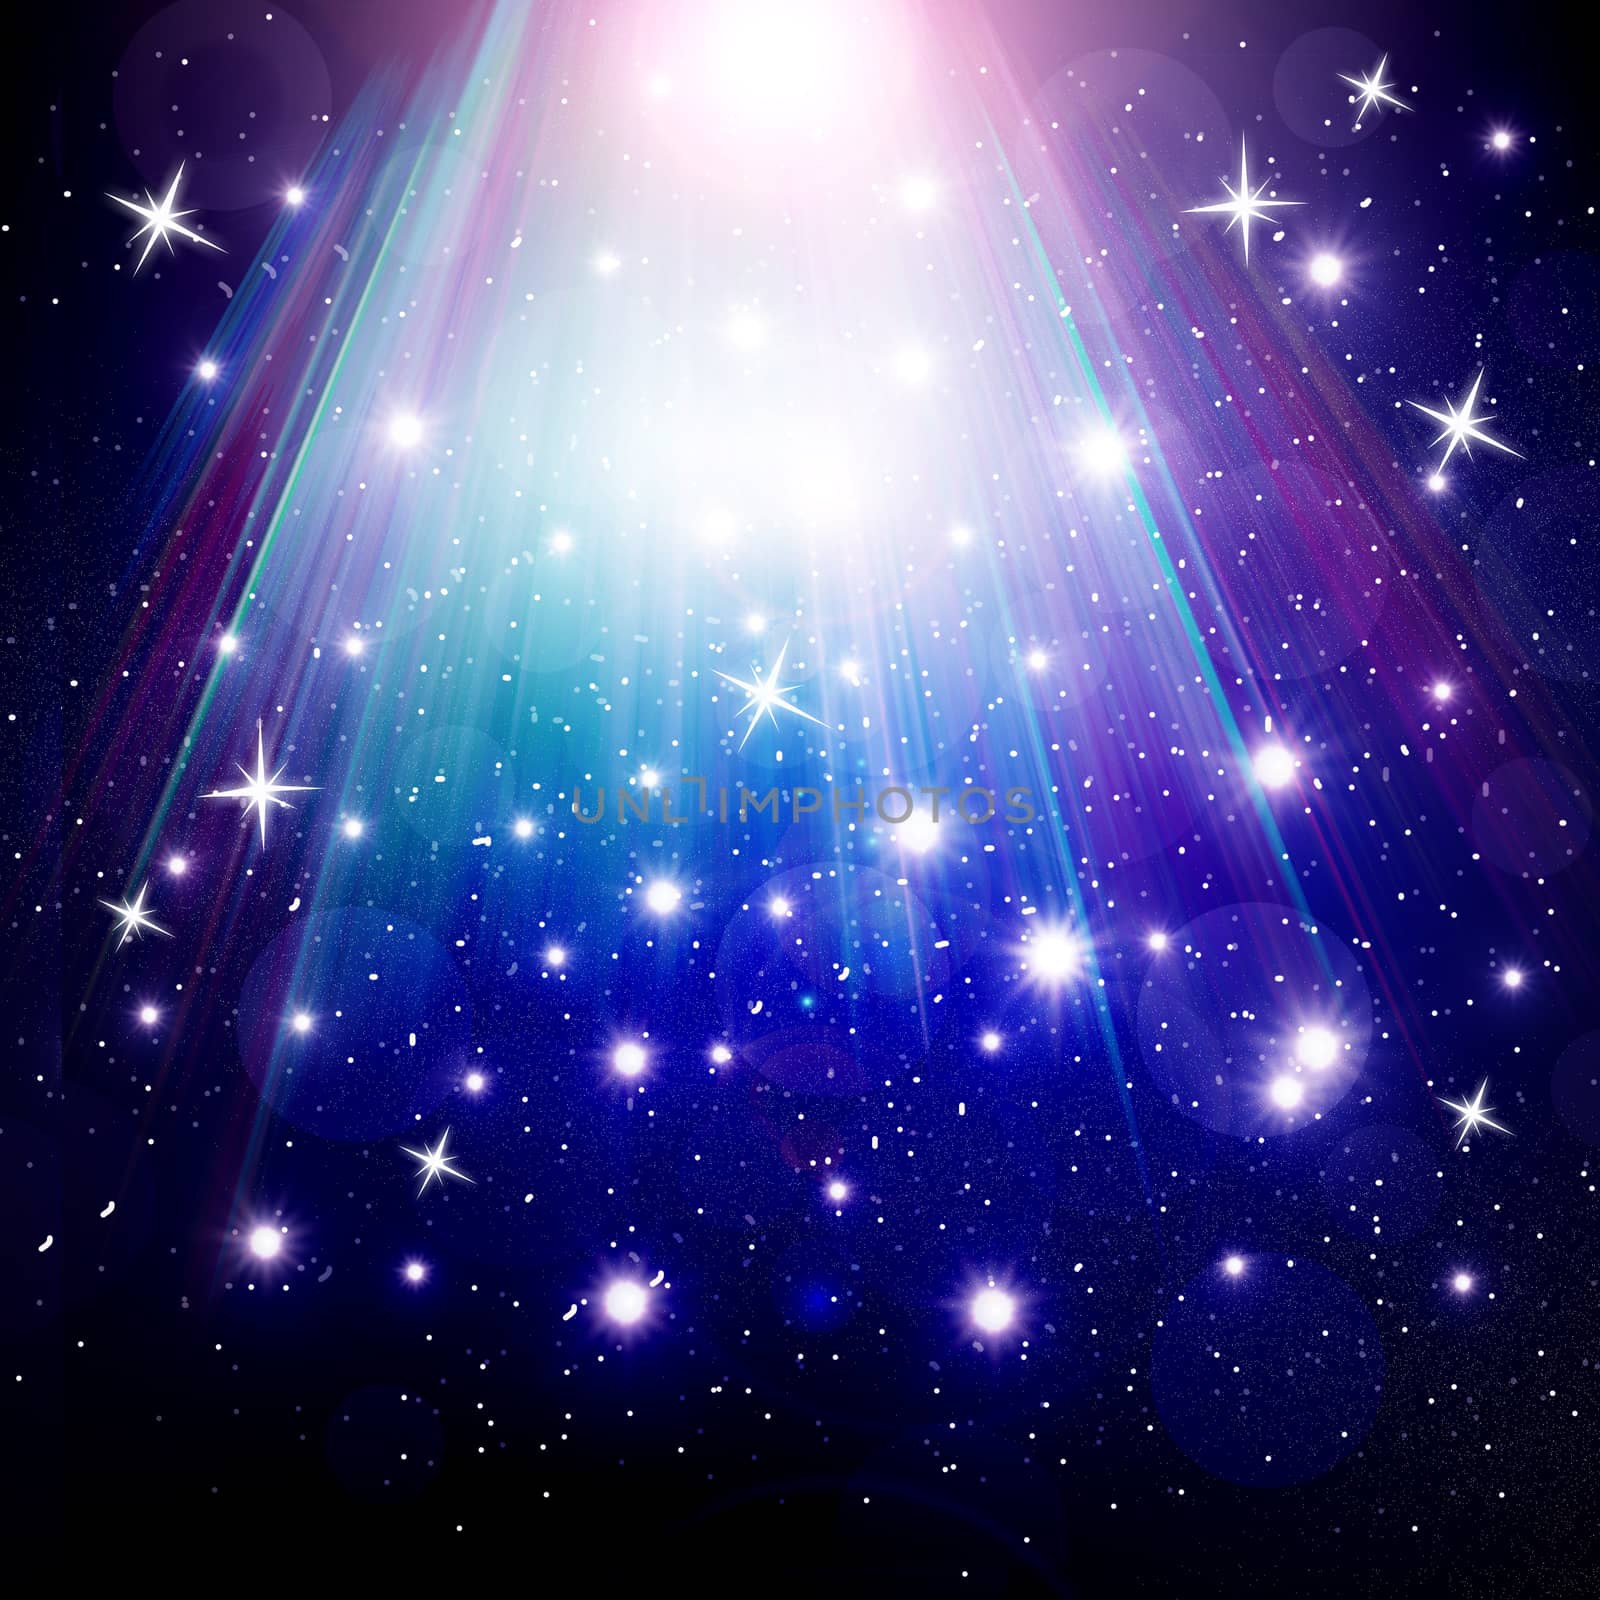 stars are falling on the background of blue luminous rays.